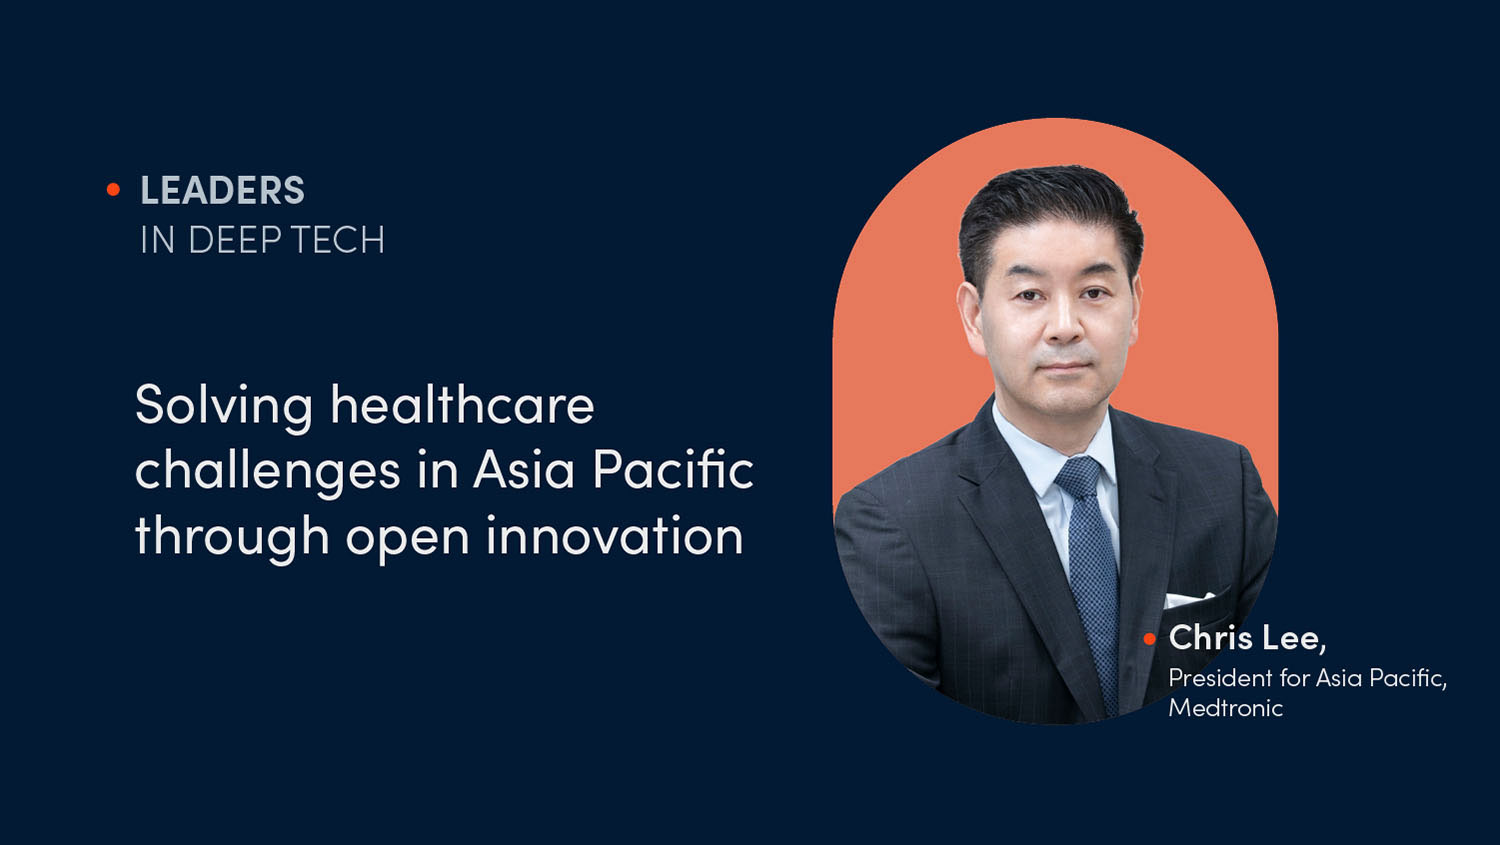 Solving healthcare challenges in Asia Pacific through open innovation